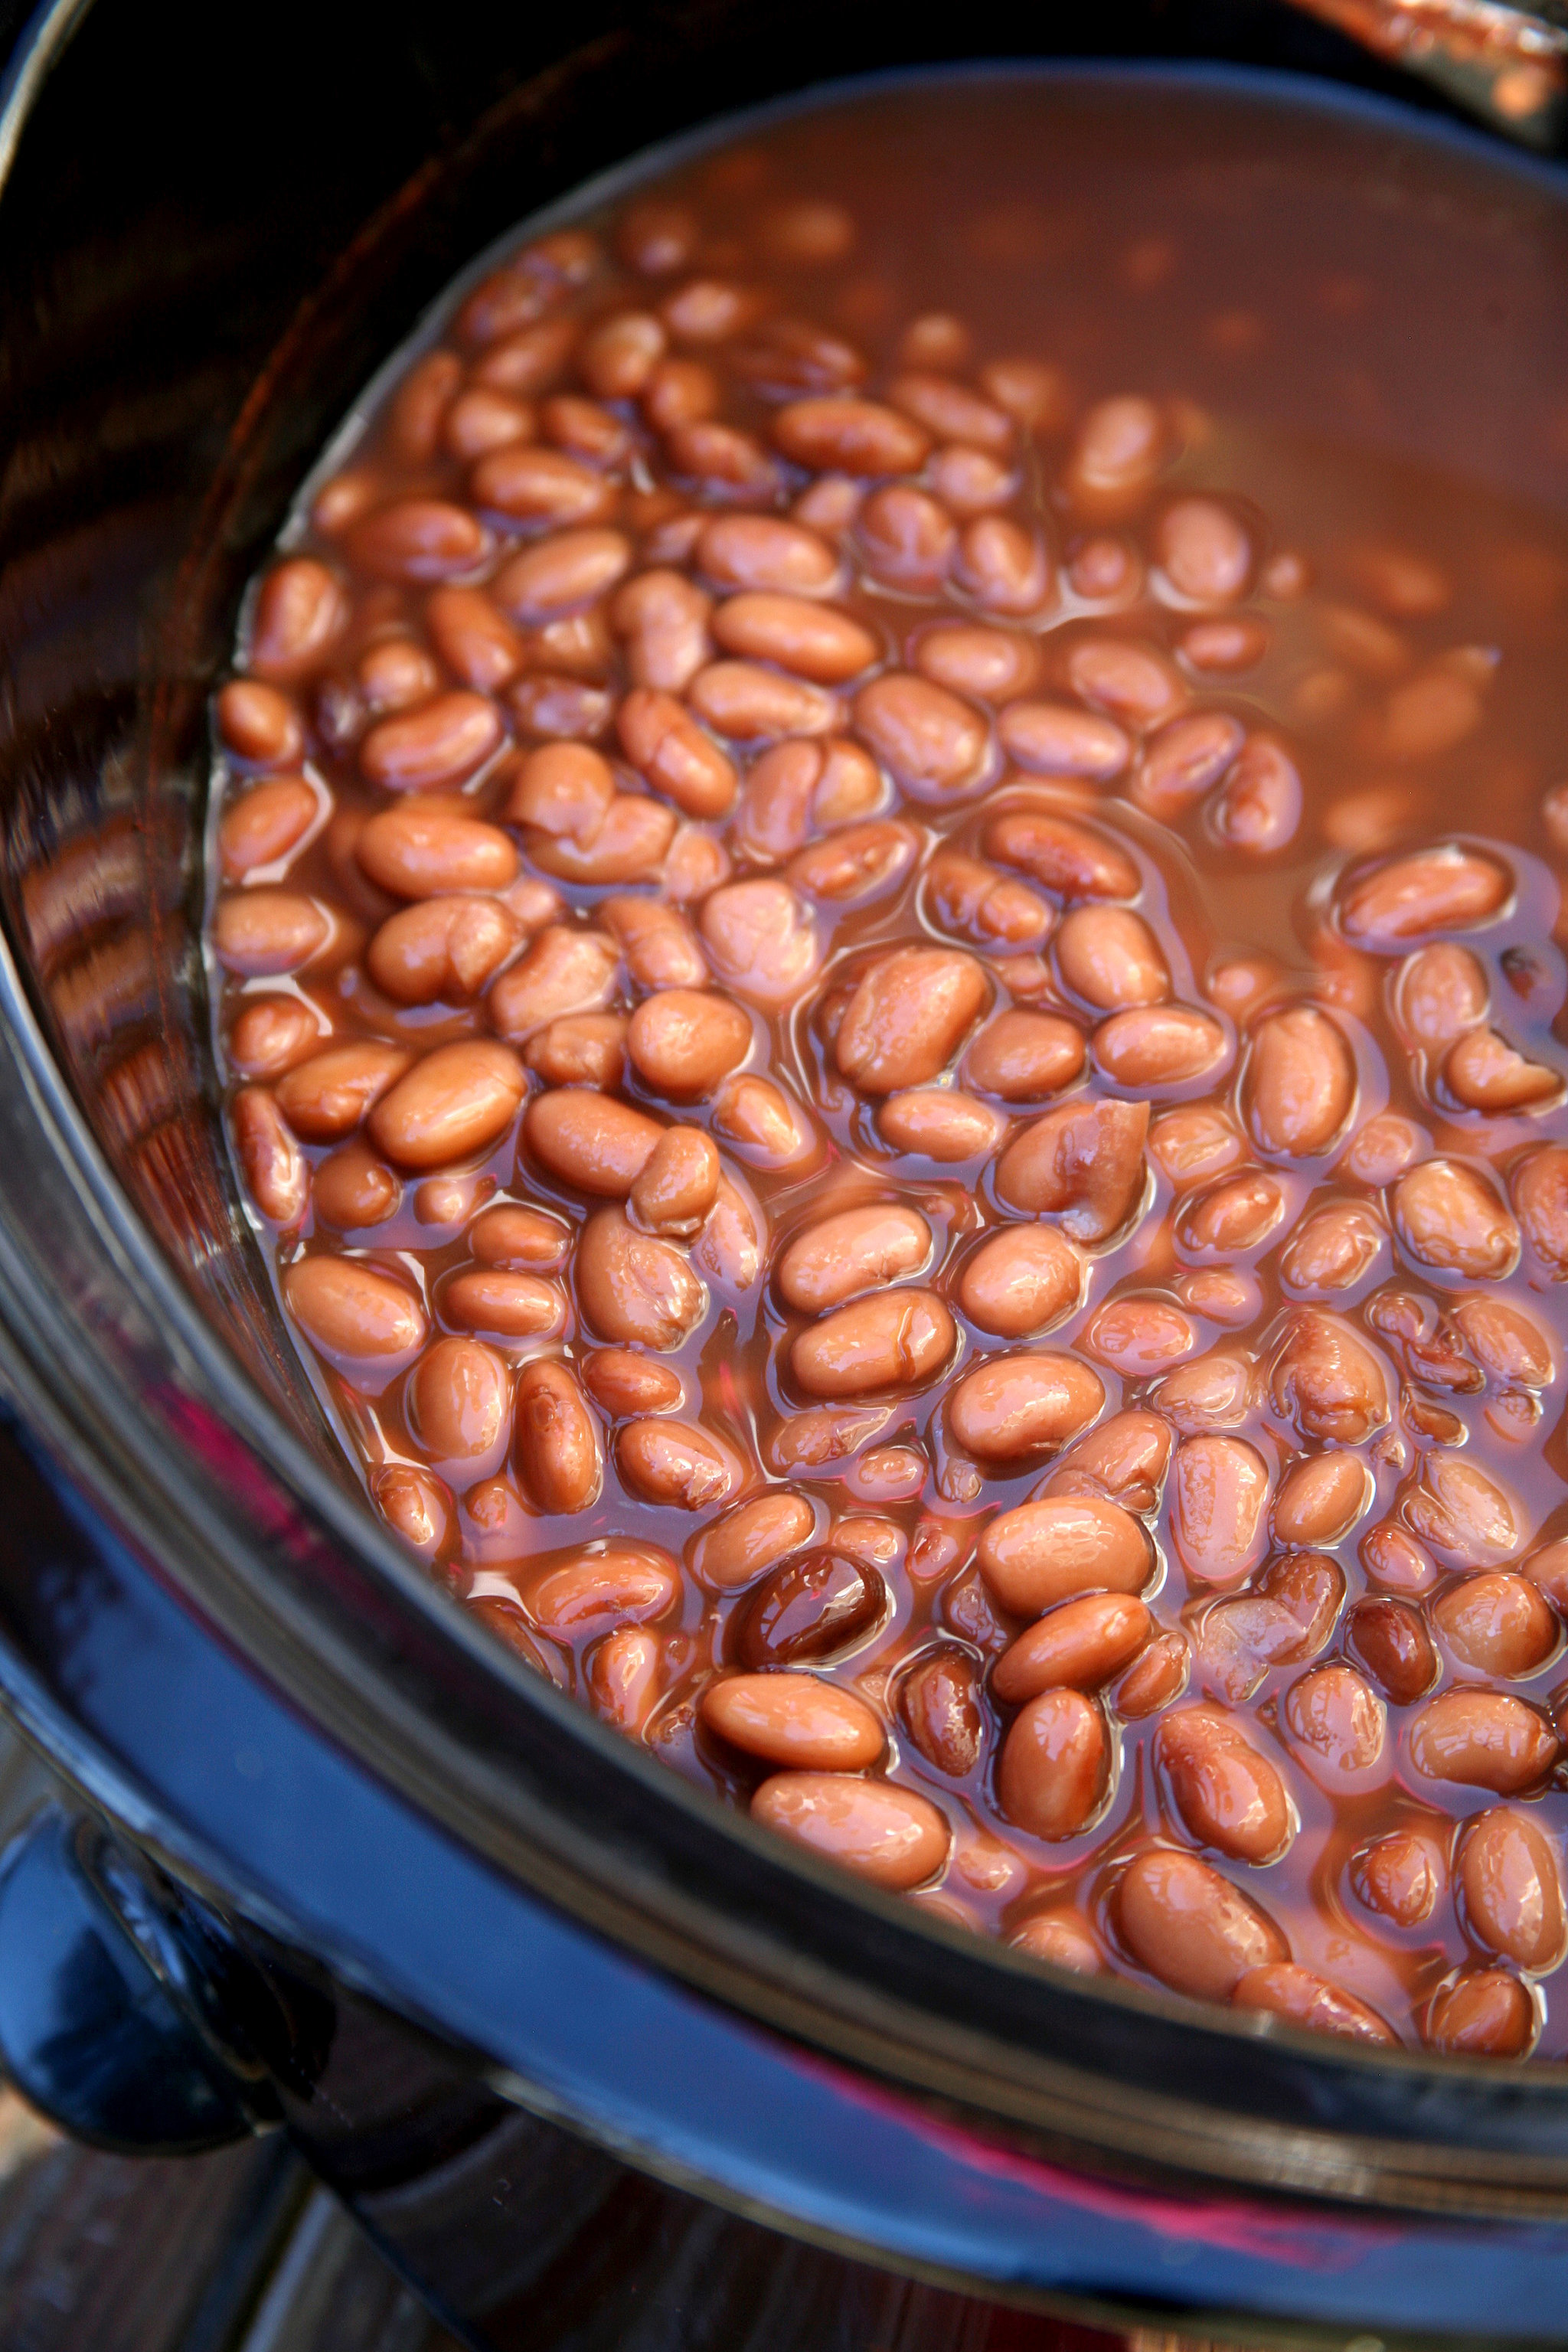 Once You Make These Slow-Cooker Beans, You'll Never Buy Canned Again